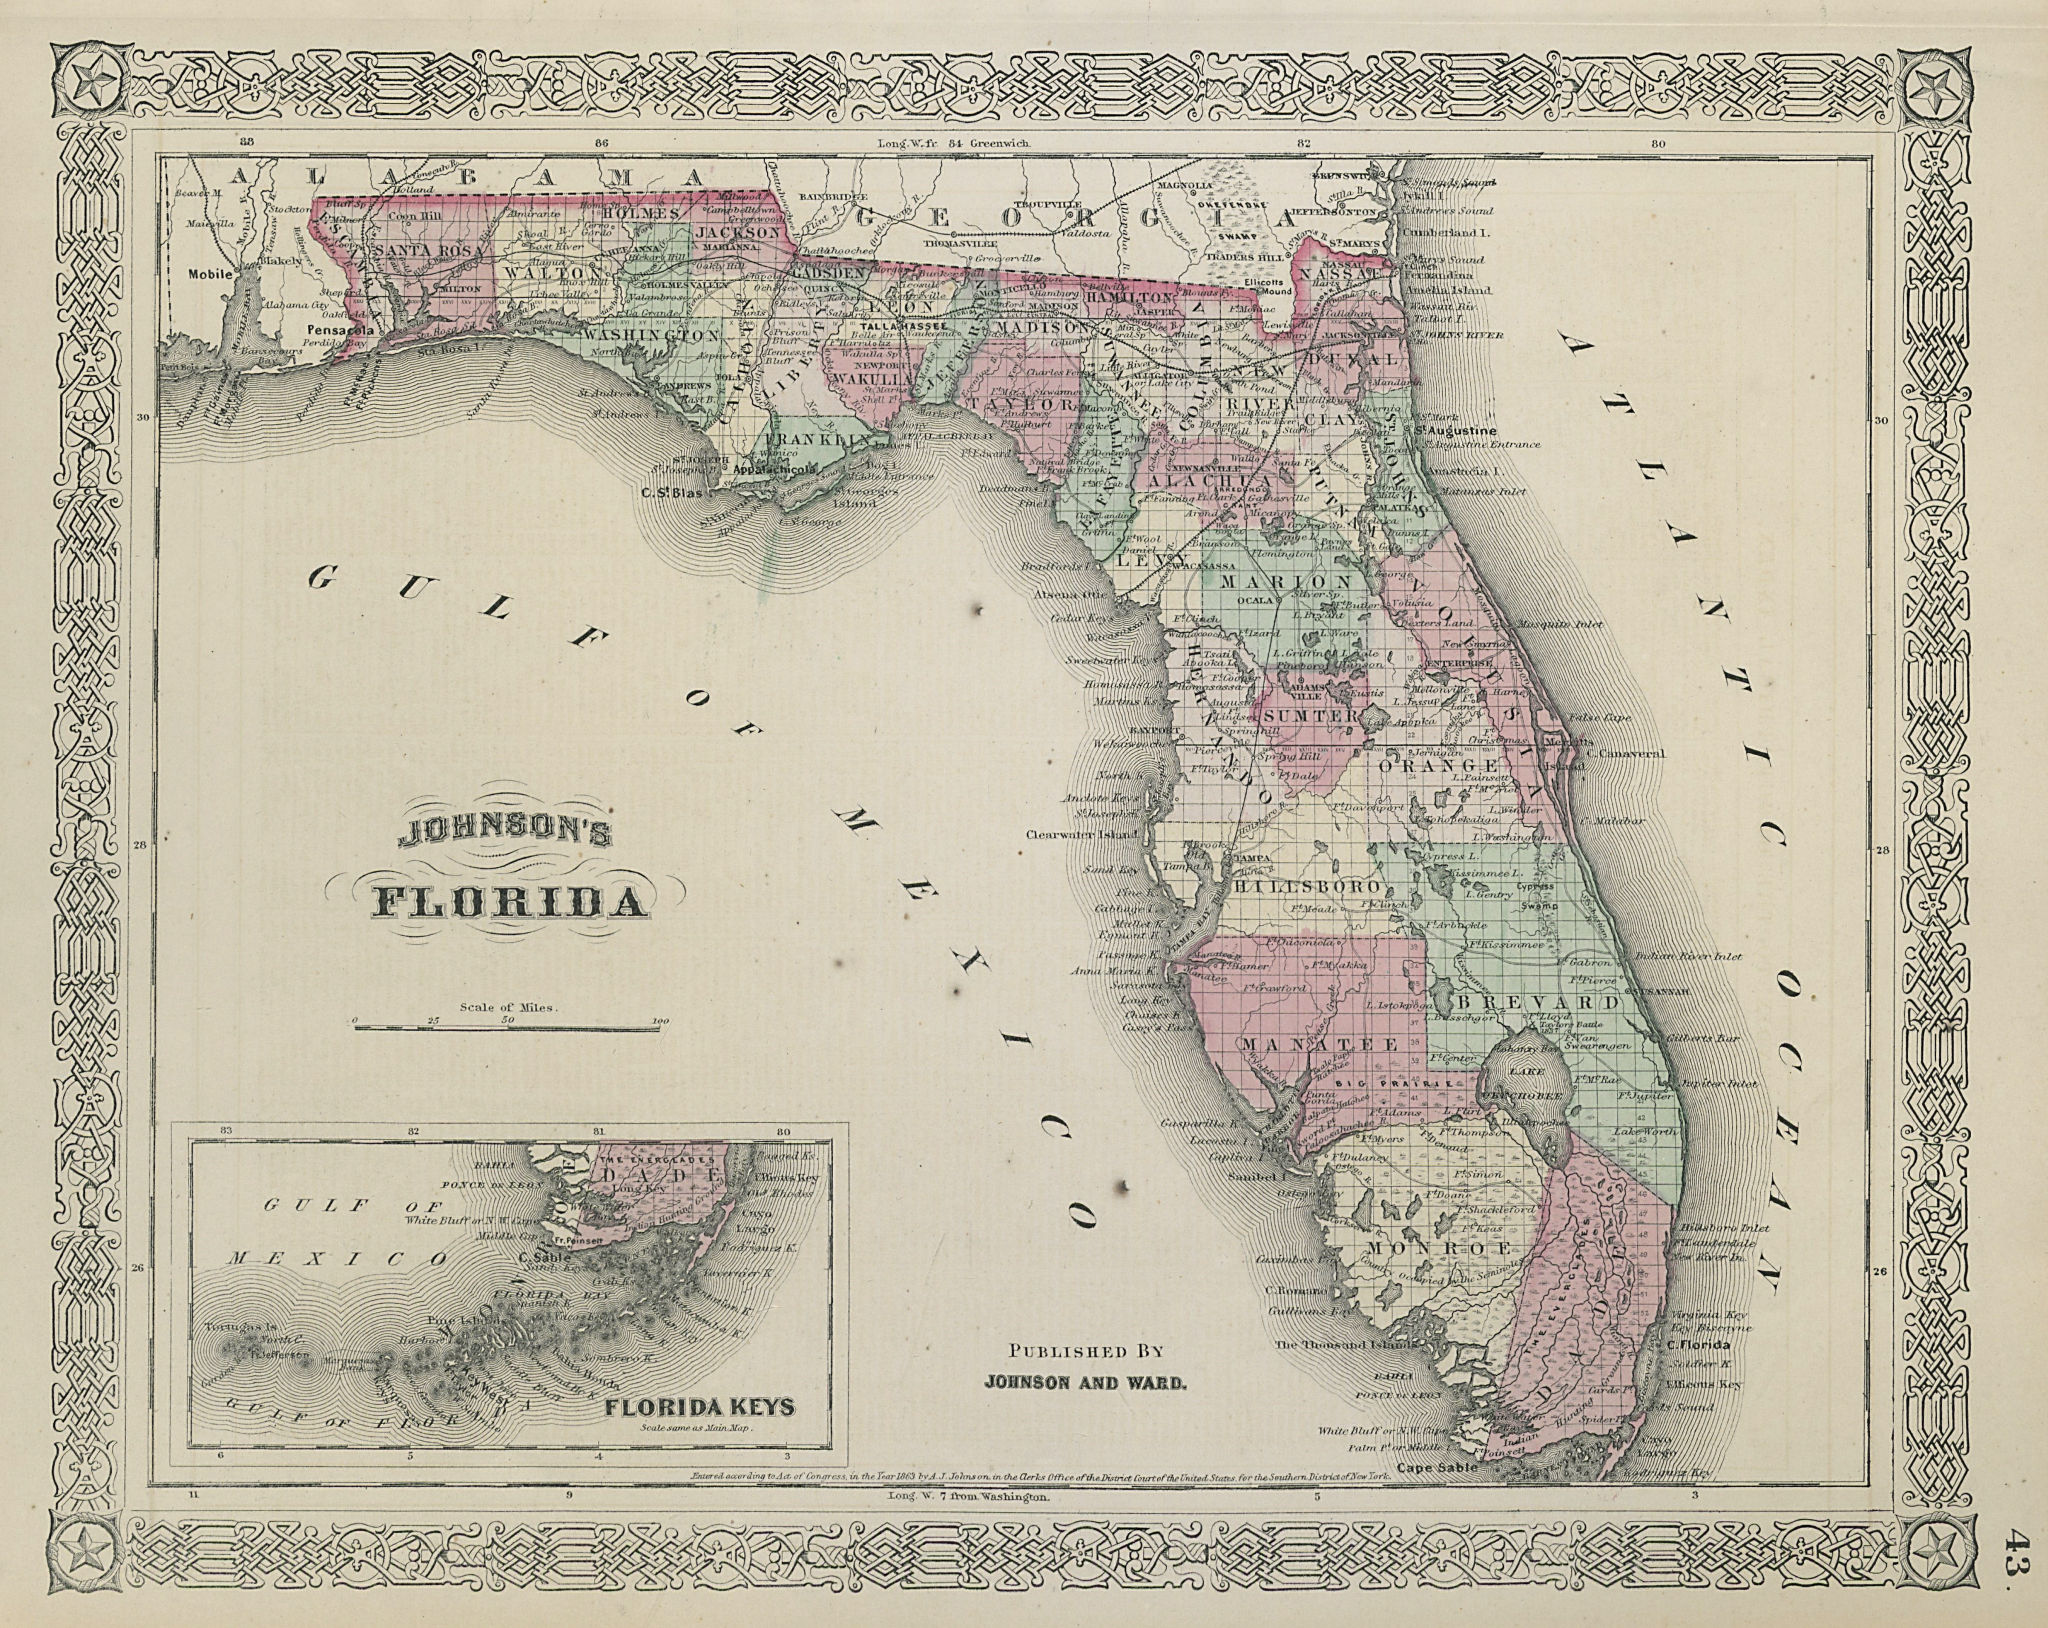 Associate Product Johnson's Florida. Florida Keys. US state map showing counties 1865 old